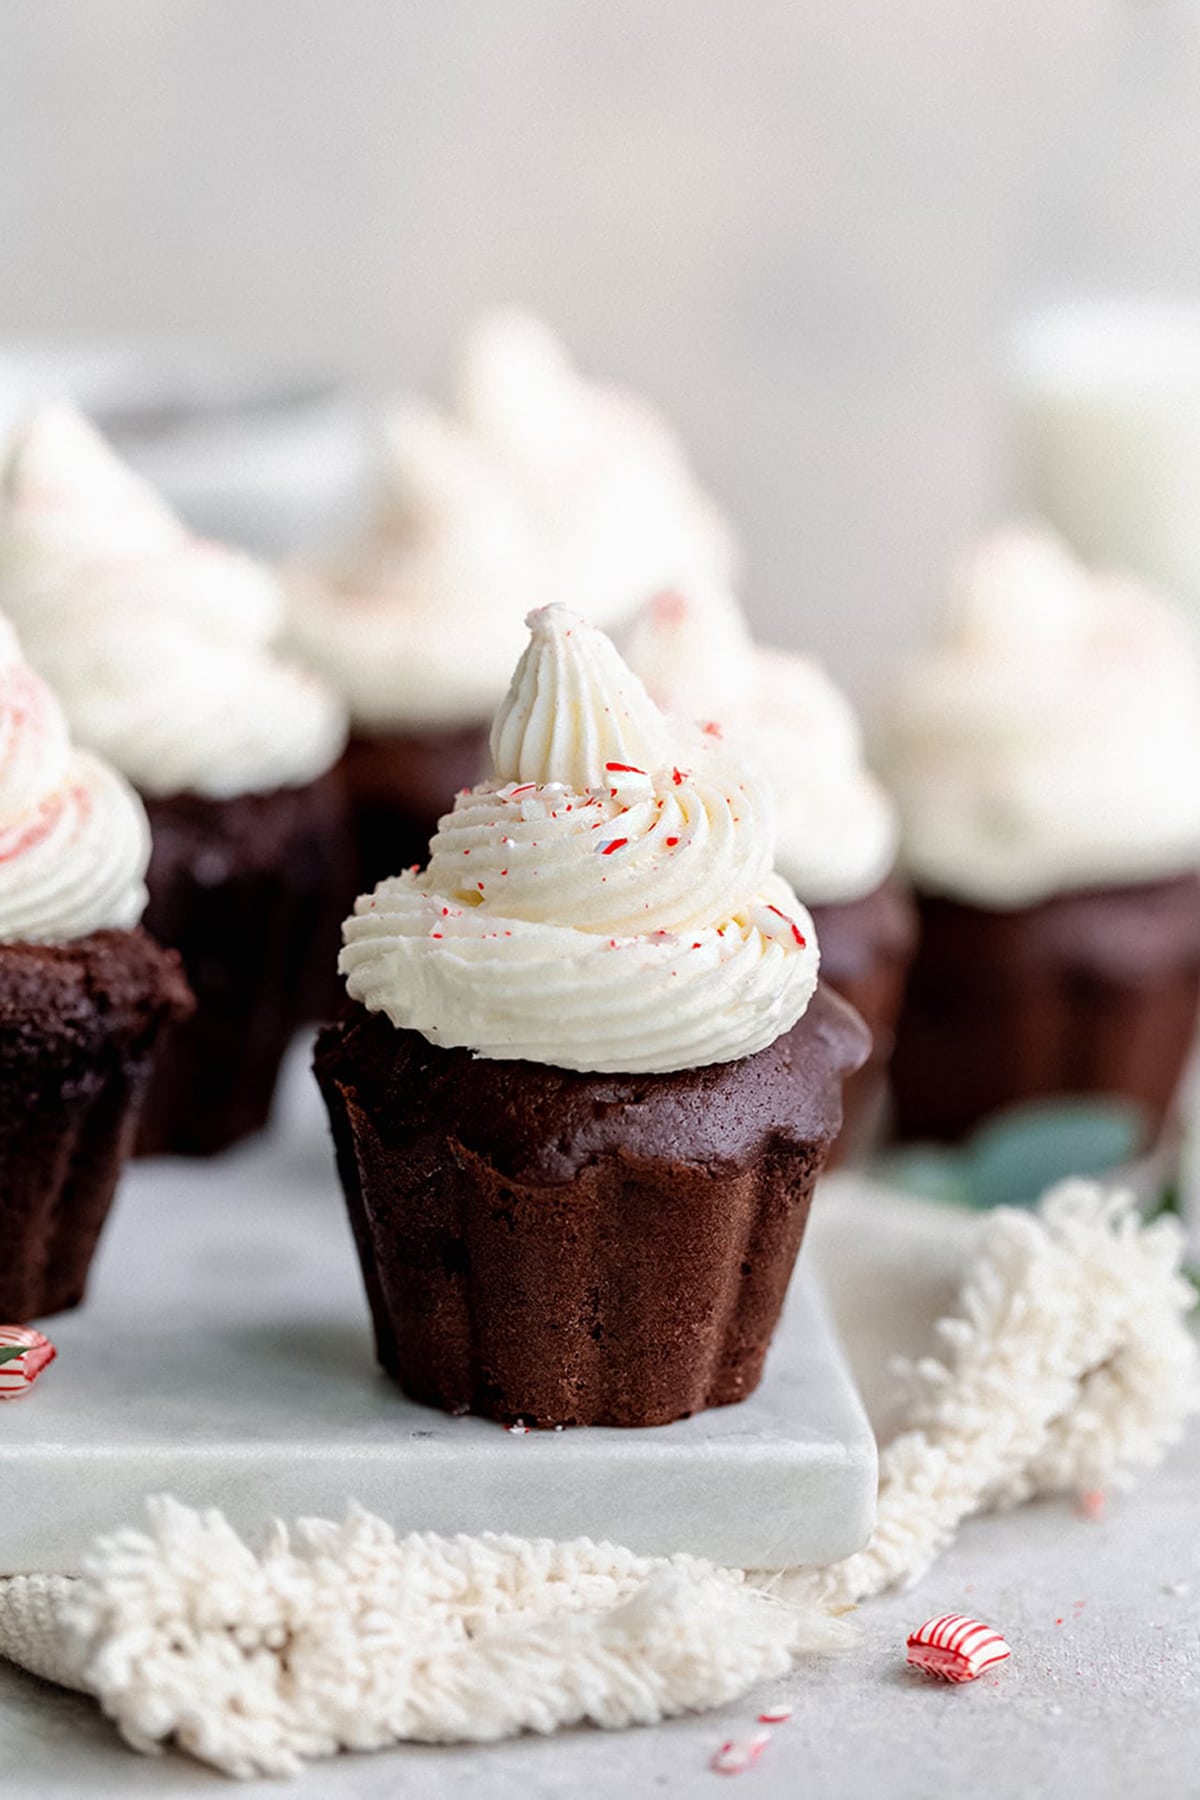 These Mexican Hot Chocolate Cupcakes are soft, moist and tender. They're infused with warm spices like cinnamon and cayenne pepper, and topped with sweet peppermint frosting for the perfect flavor balance. 